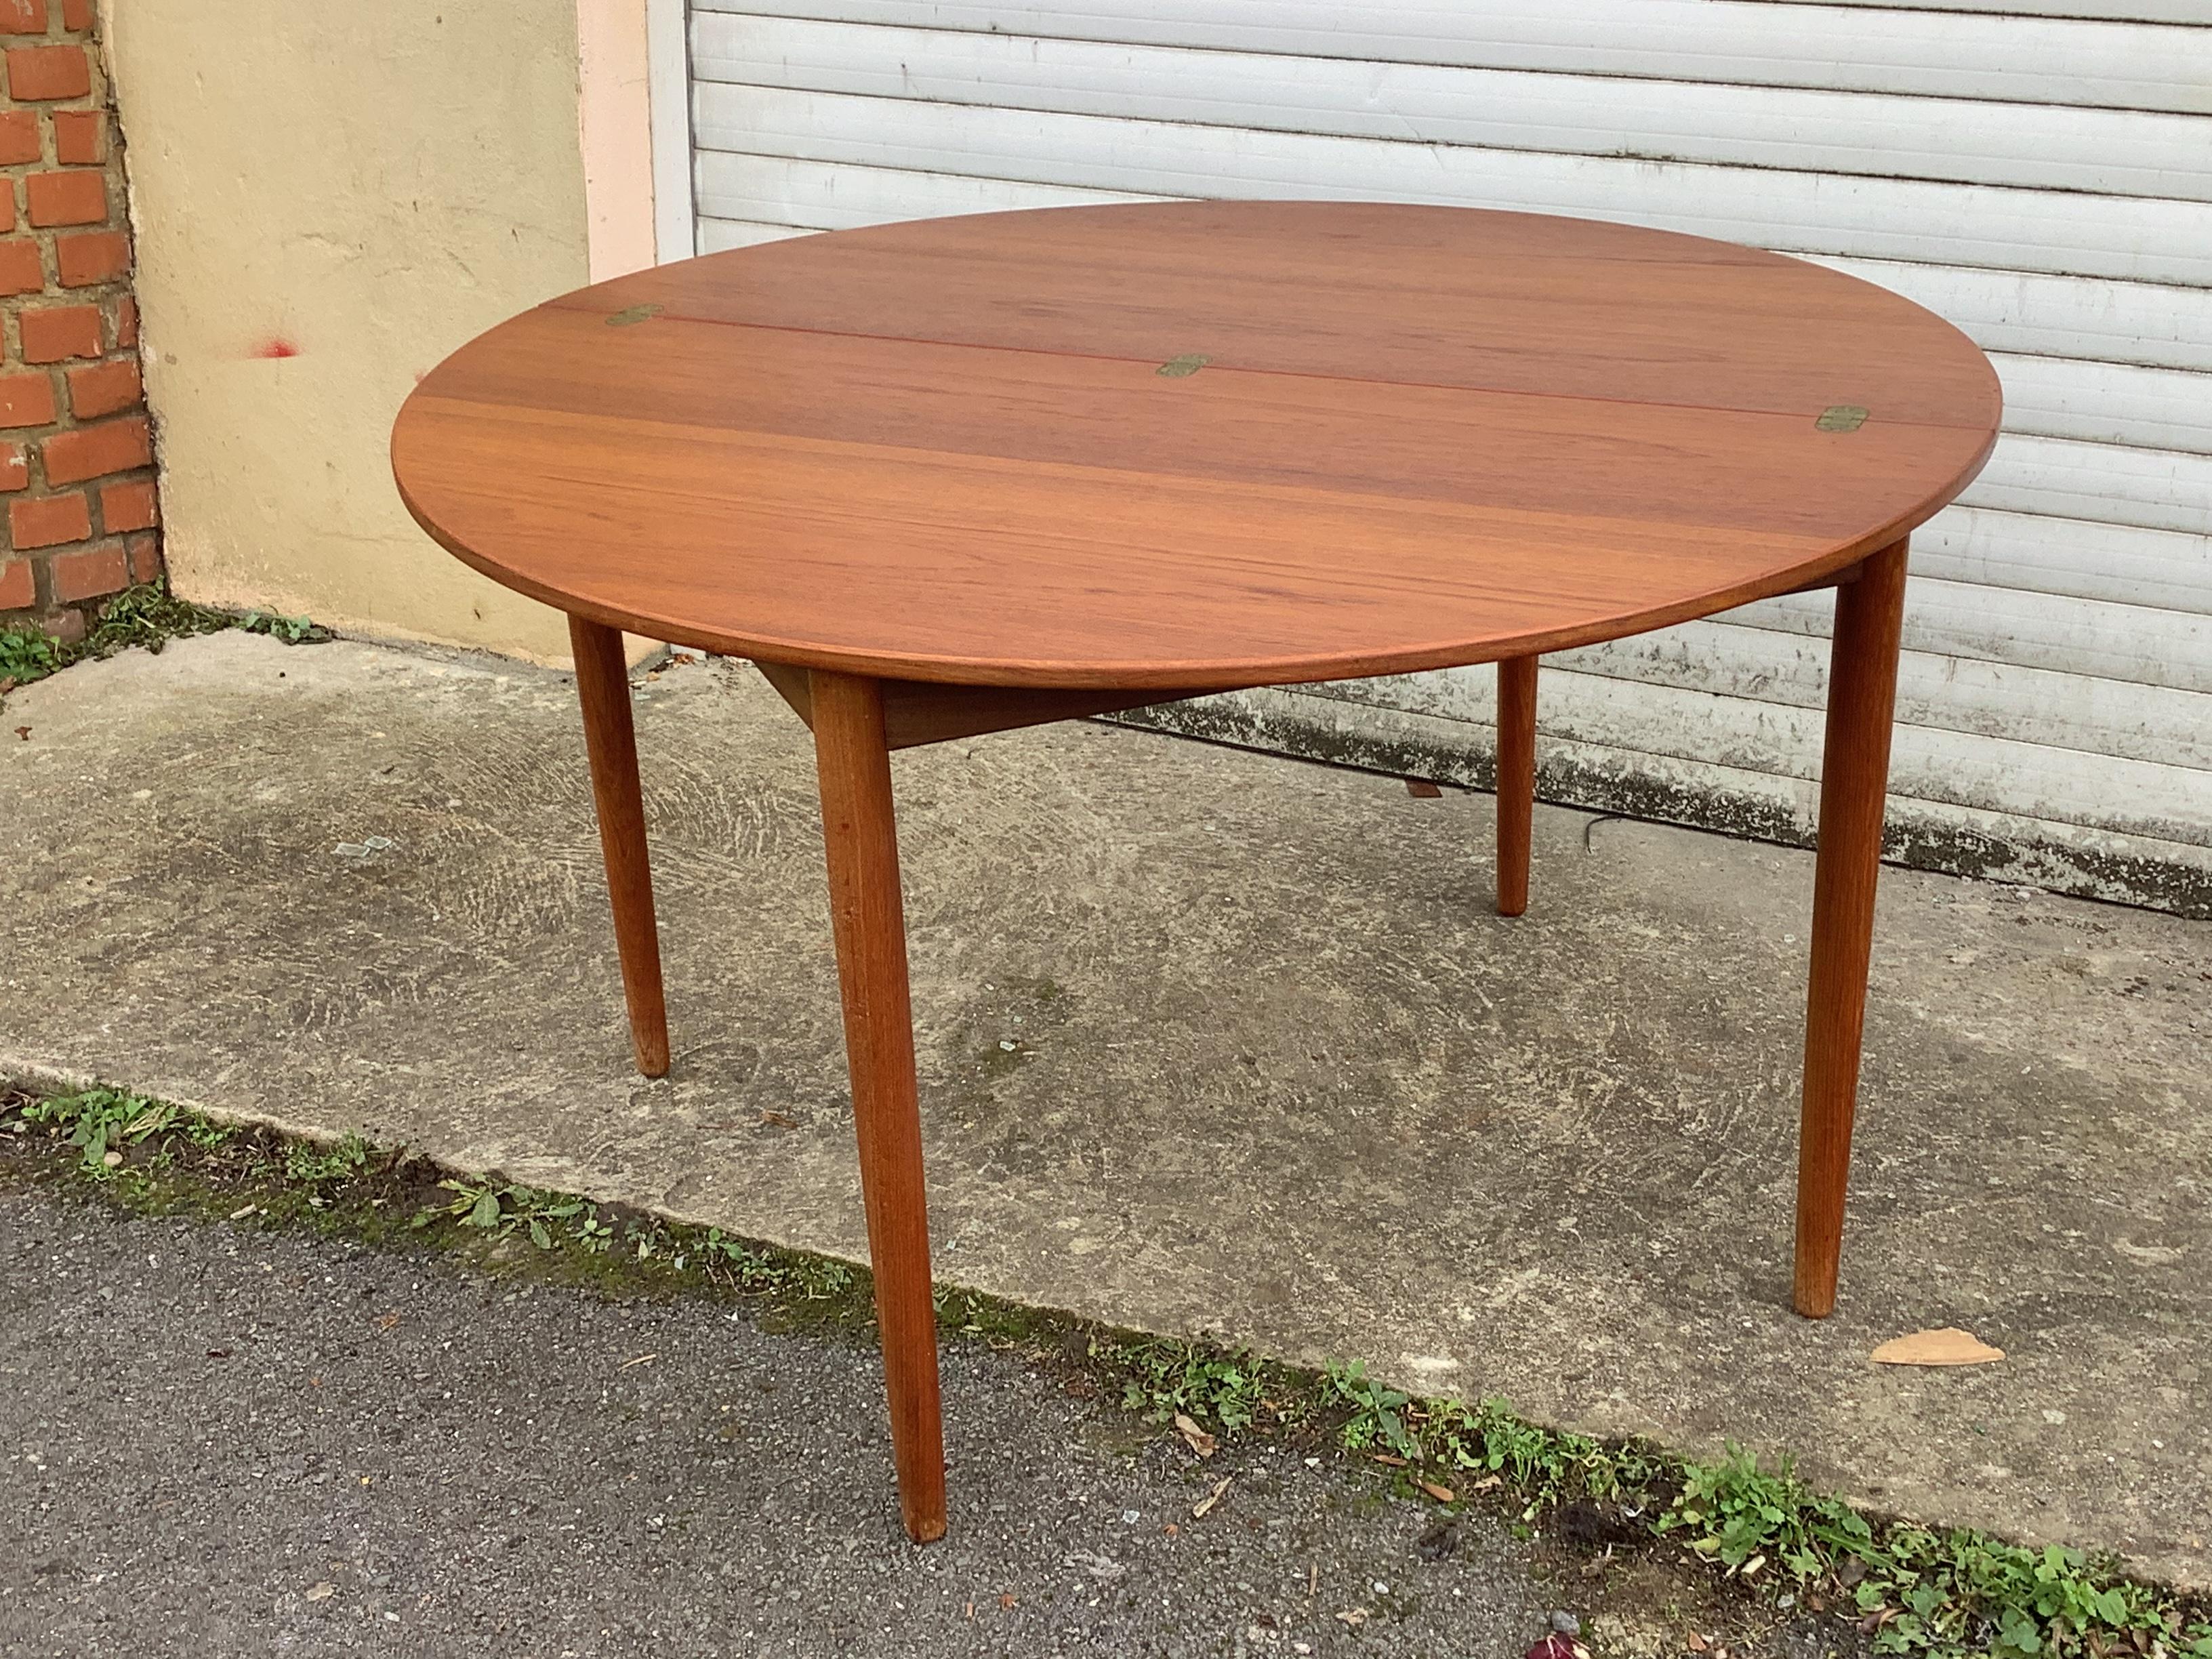 Superb half circle teak lounge table which extends to a full circle table.

The lounge table is intended to be used as against the wall and then centrally placed in the room when extended to its full circle.
The top has intgrated brass hinges and